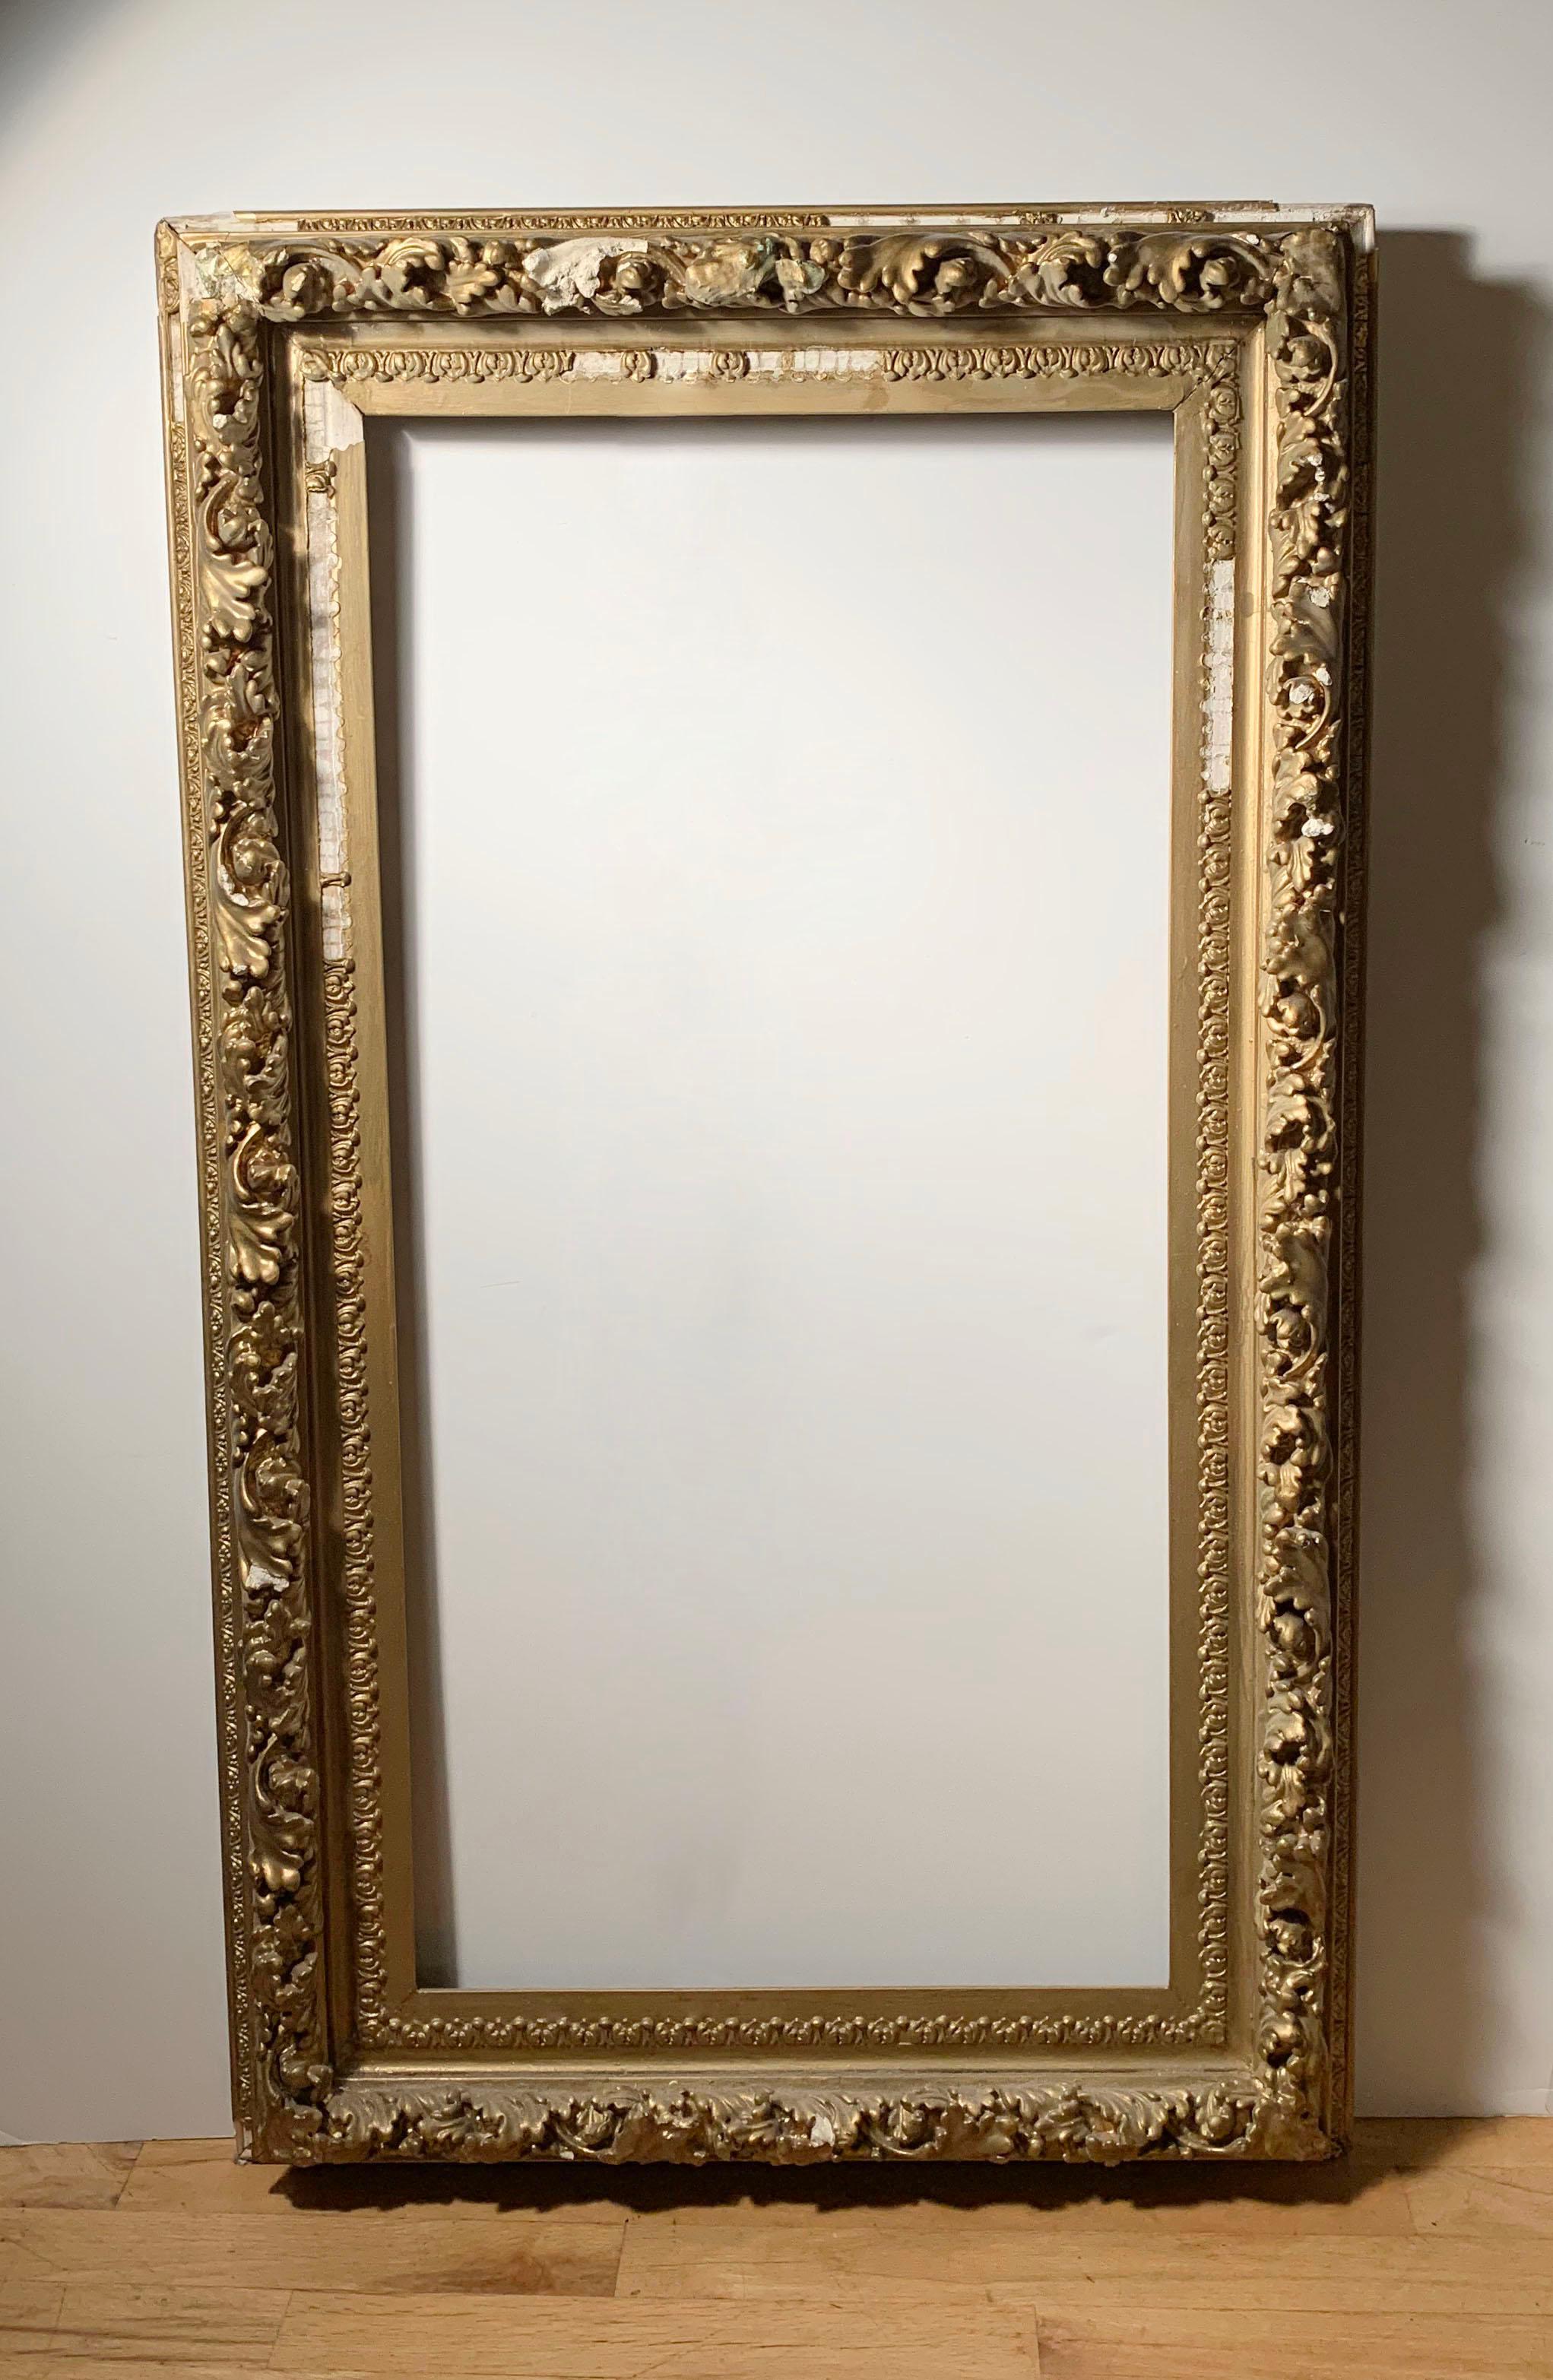 Large antique gilt French mirror / art frame

Needs restoration. A beautiful design for either a mirror or period artwork,
19th century or earlier.
 
  